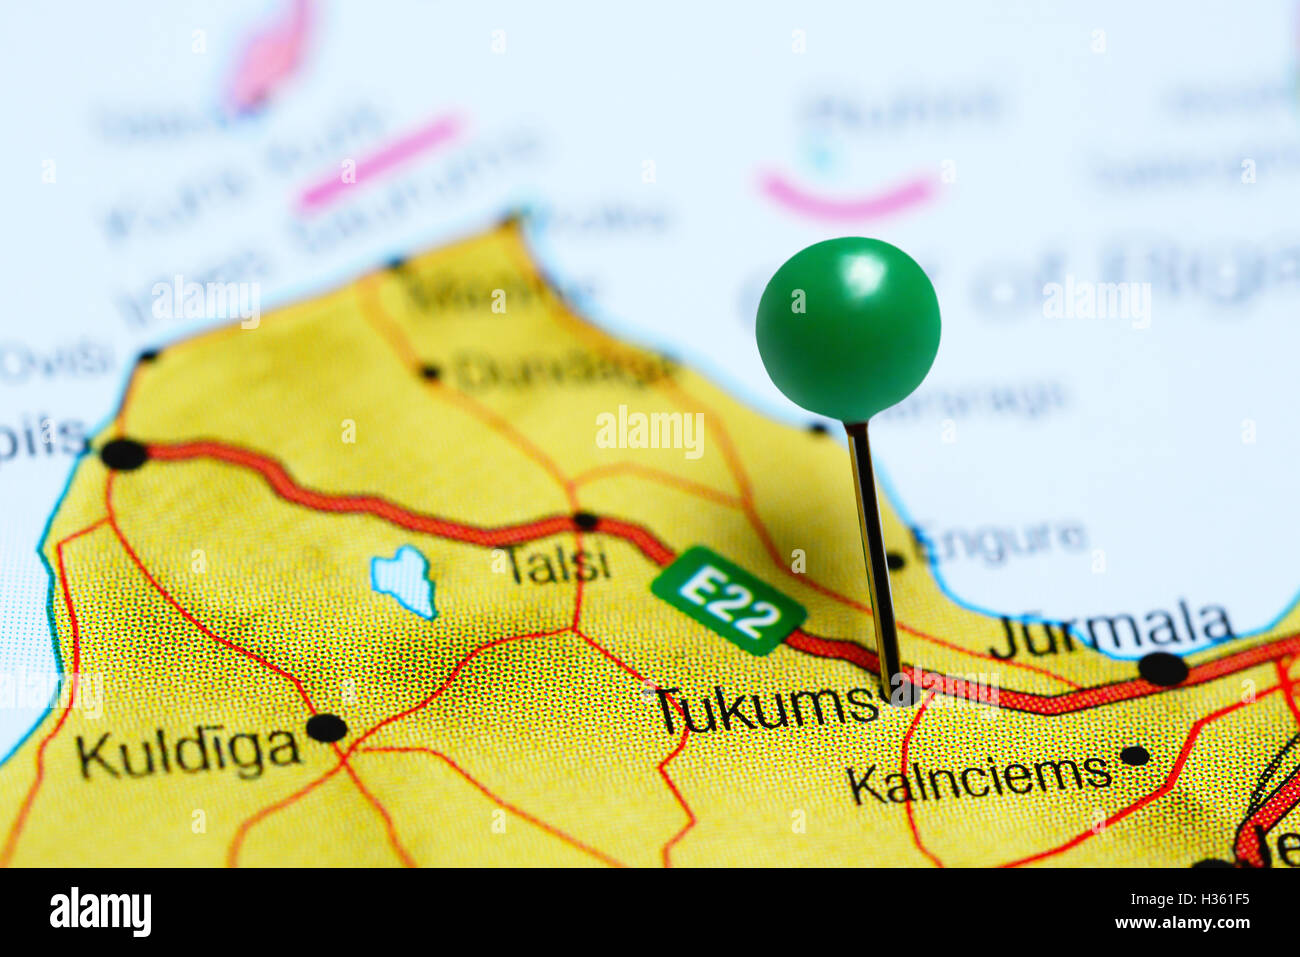 Tukums pinned on a map of Latvia Stock Photo